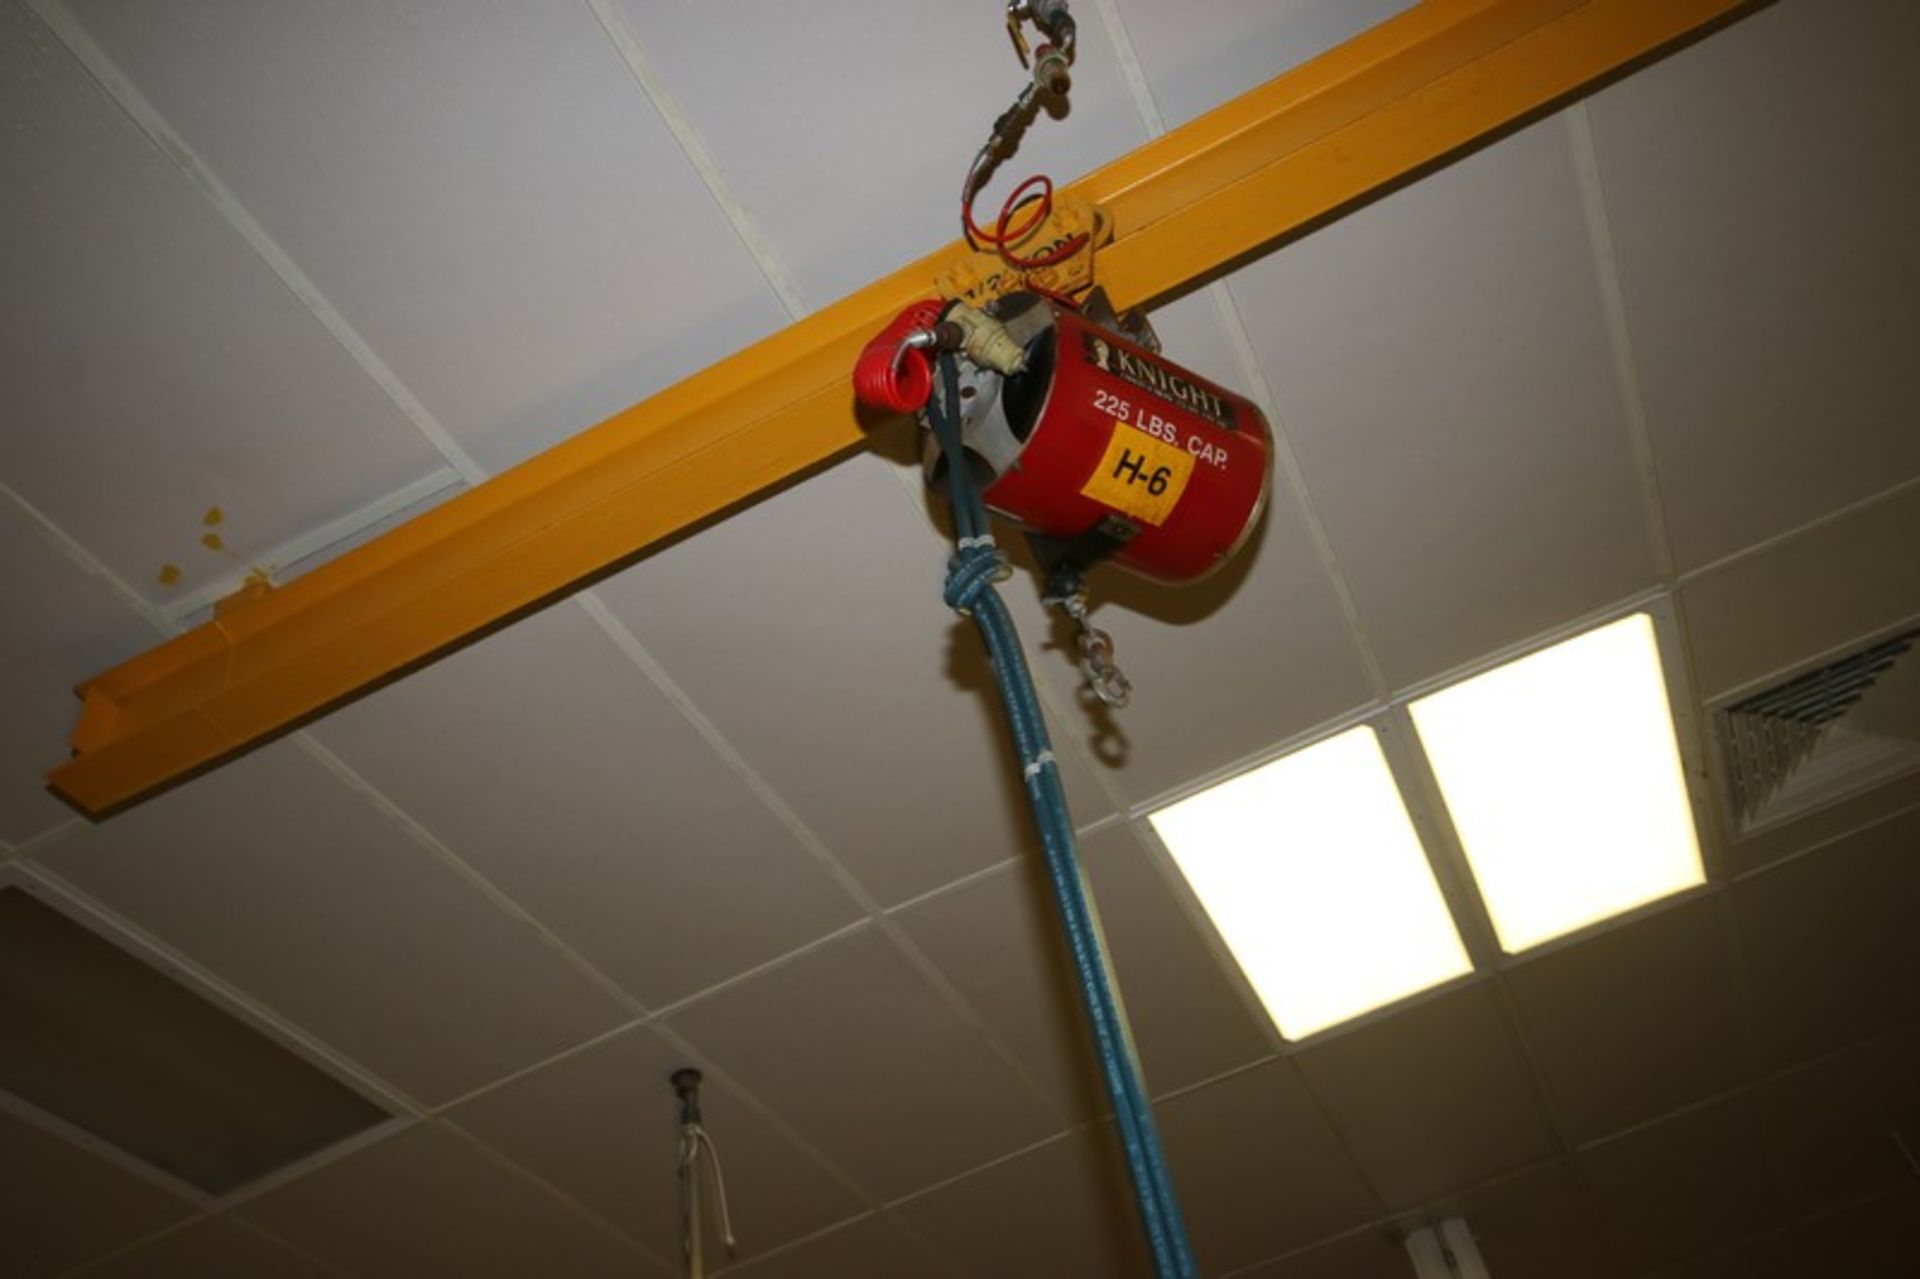 Knight 225 lbs. Capacity Pneumatic OverheadHoist, with Hand Control (NOTE: Does Not Include Cross